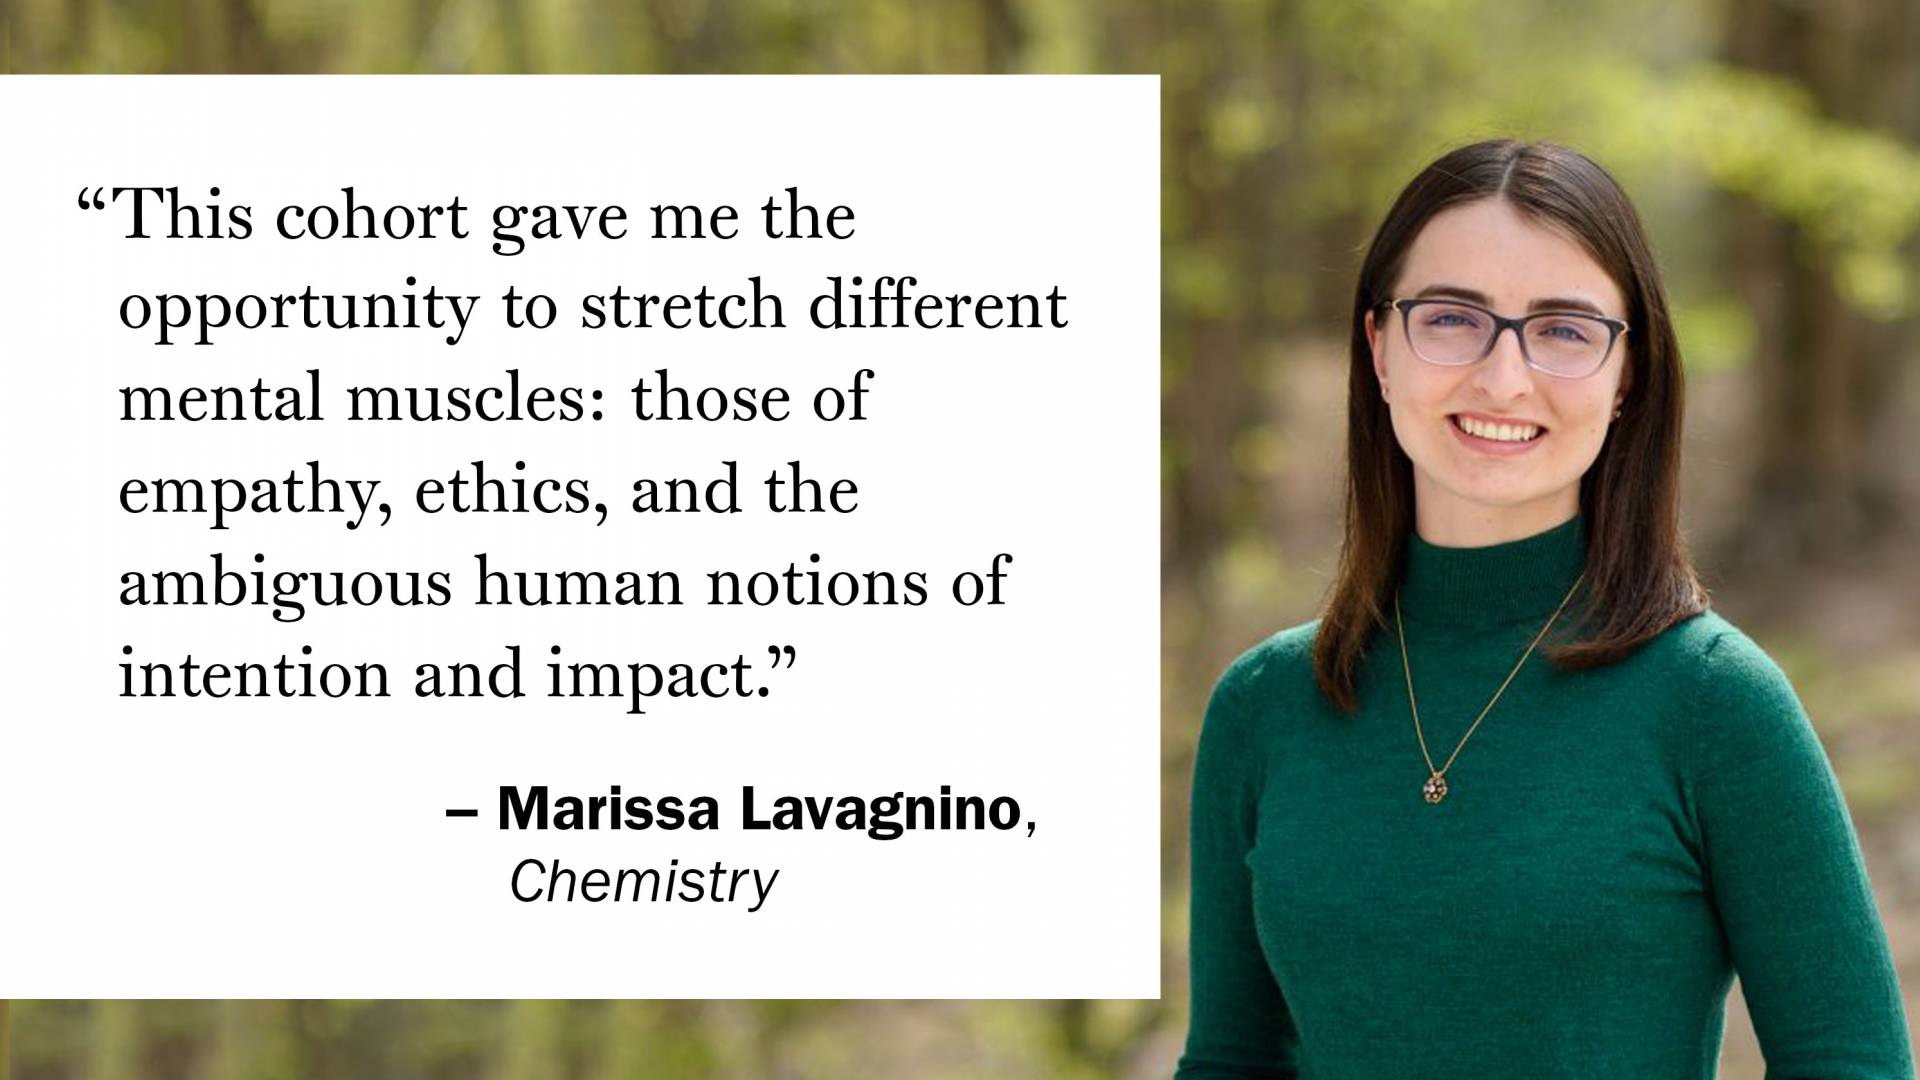 "This cohort gave me the opportunity to stretch different mental muscles: those of empathy, ethics, and the ambiguous human notions of intention and impact." —Marissa Lavagnino, Chemistry